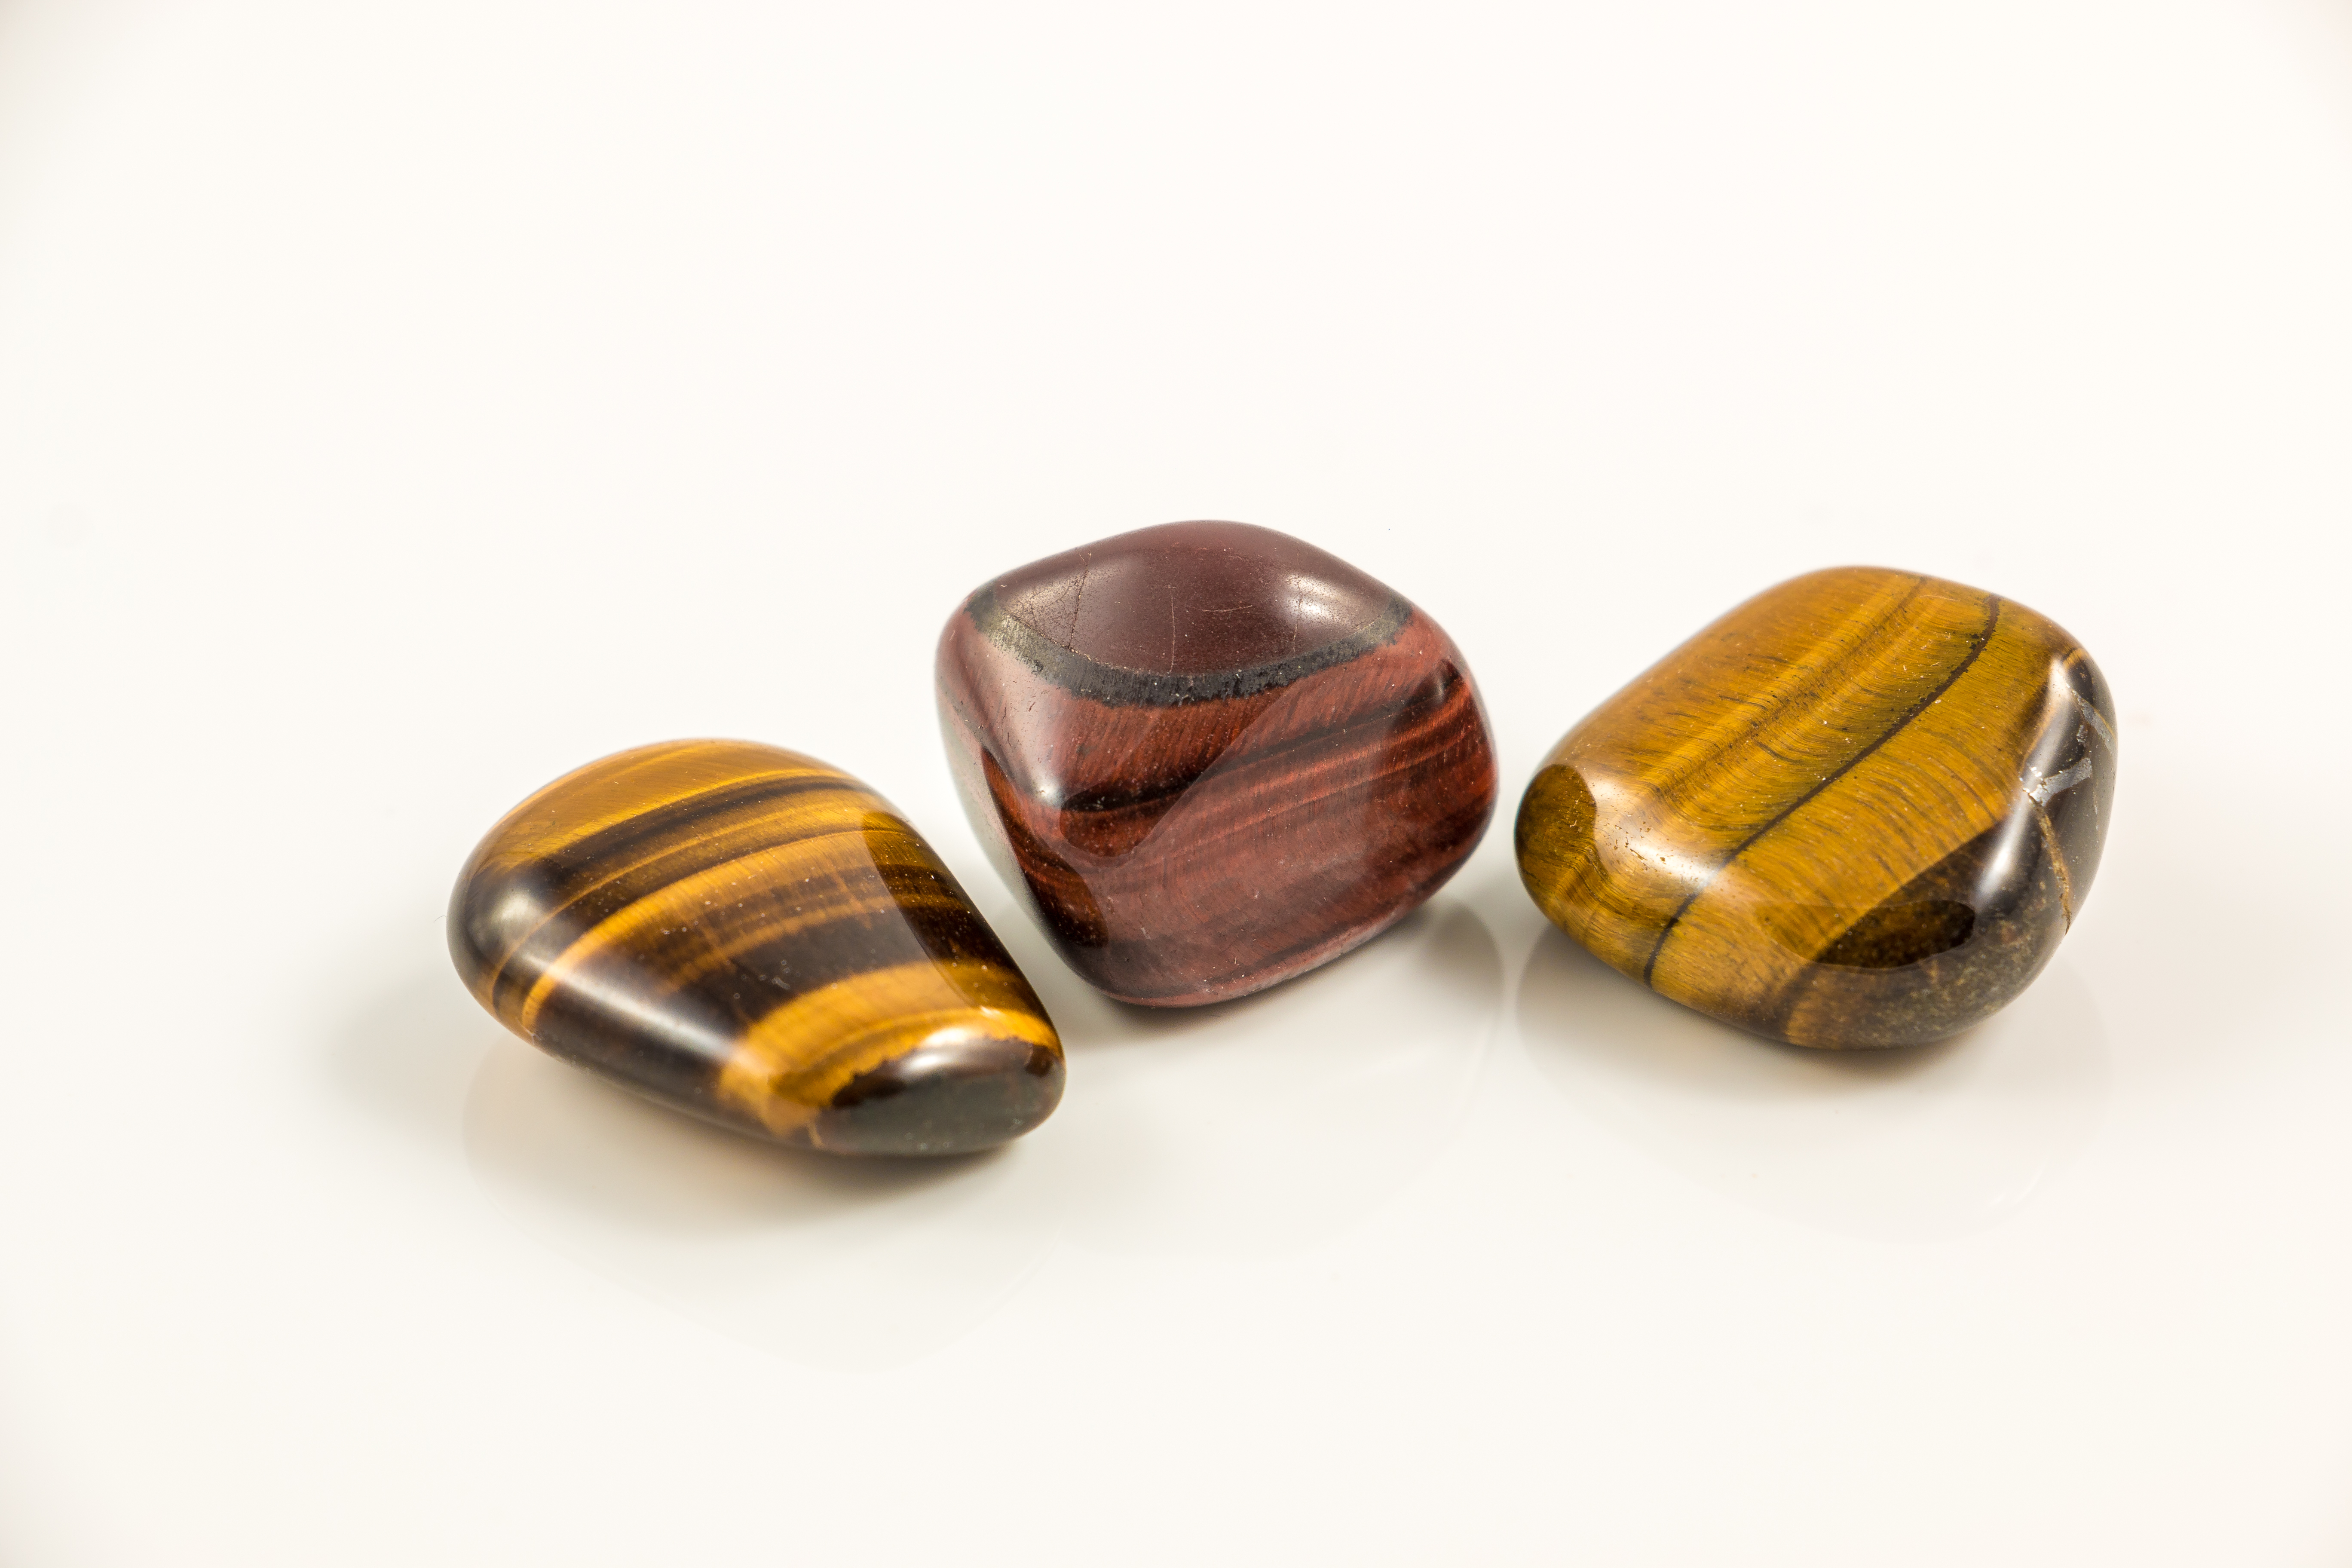 Three pieces of Tiger's Eye on a white background